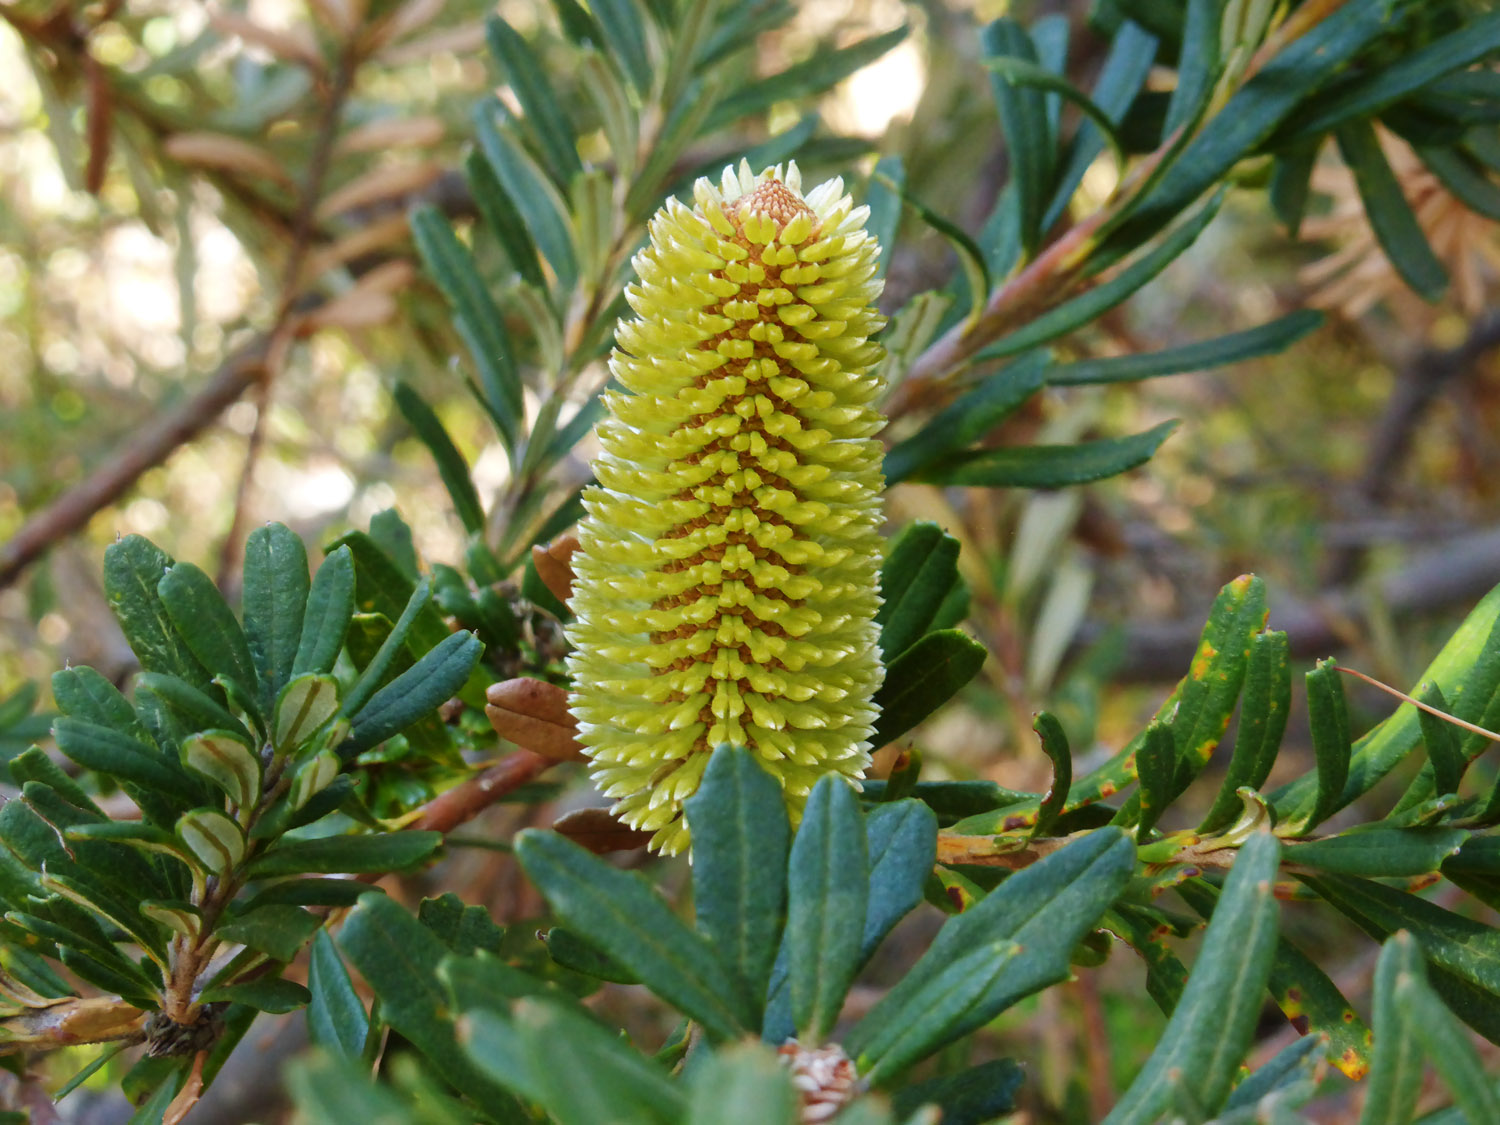 A young banksia flower